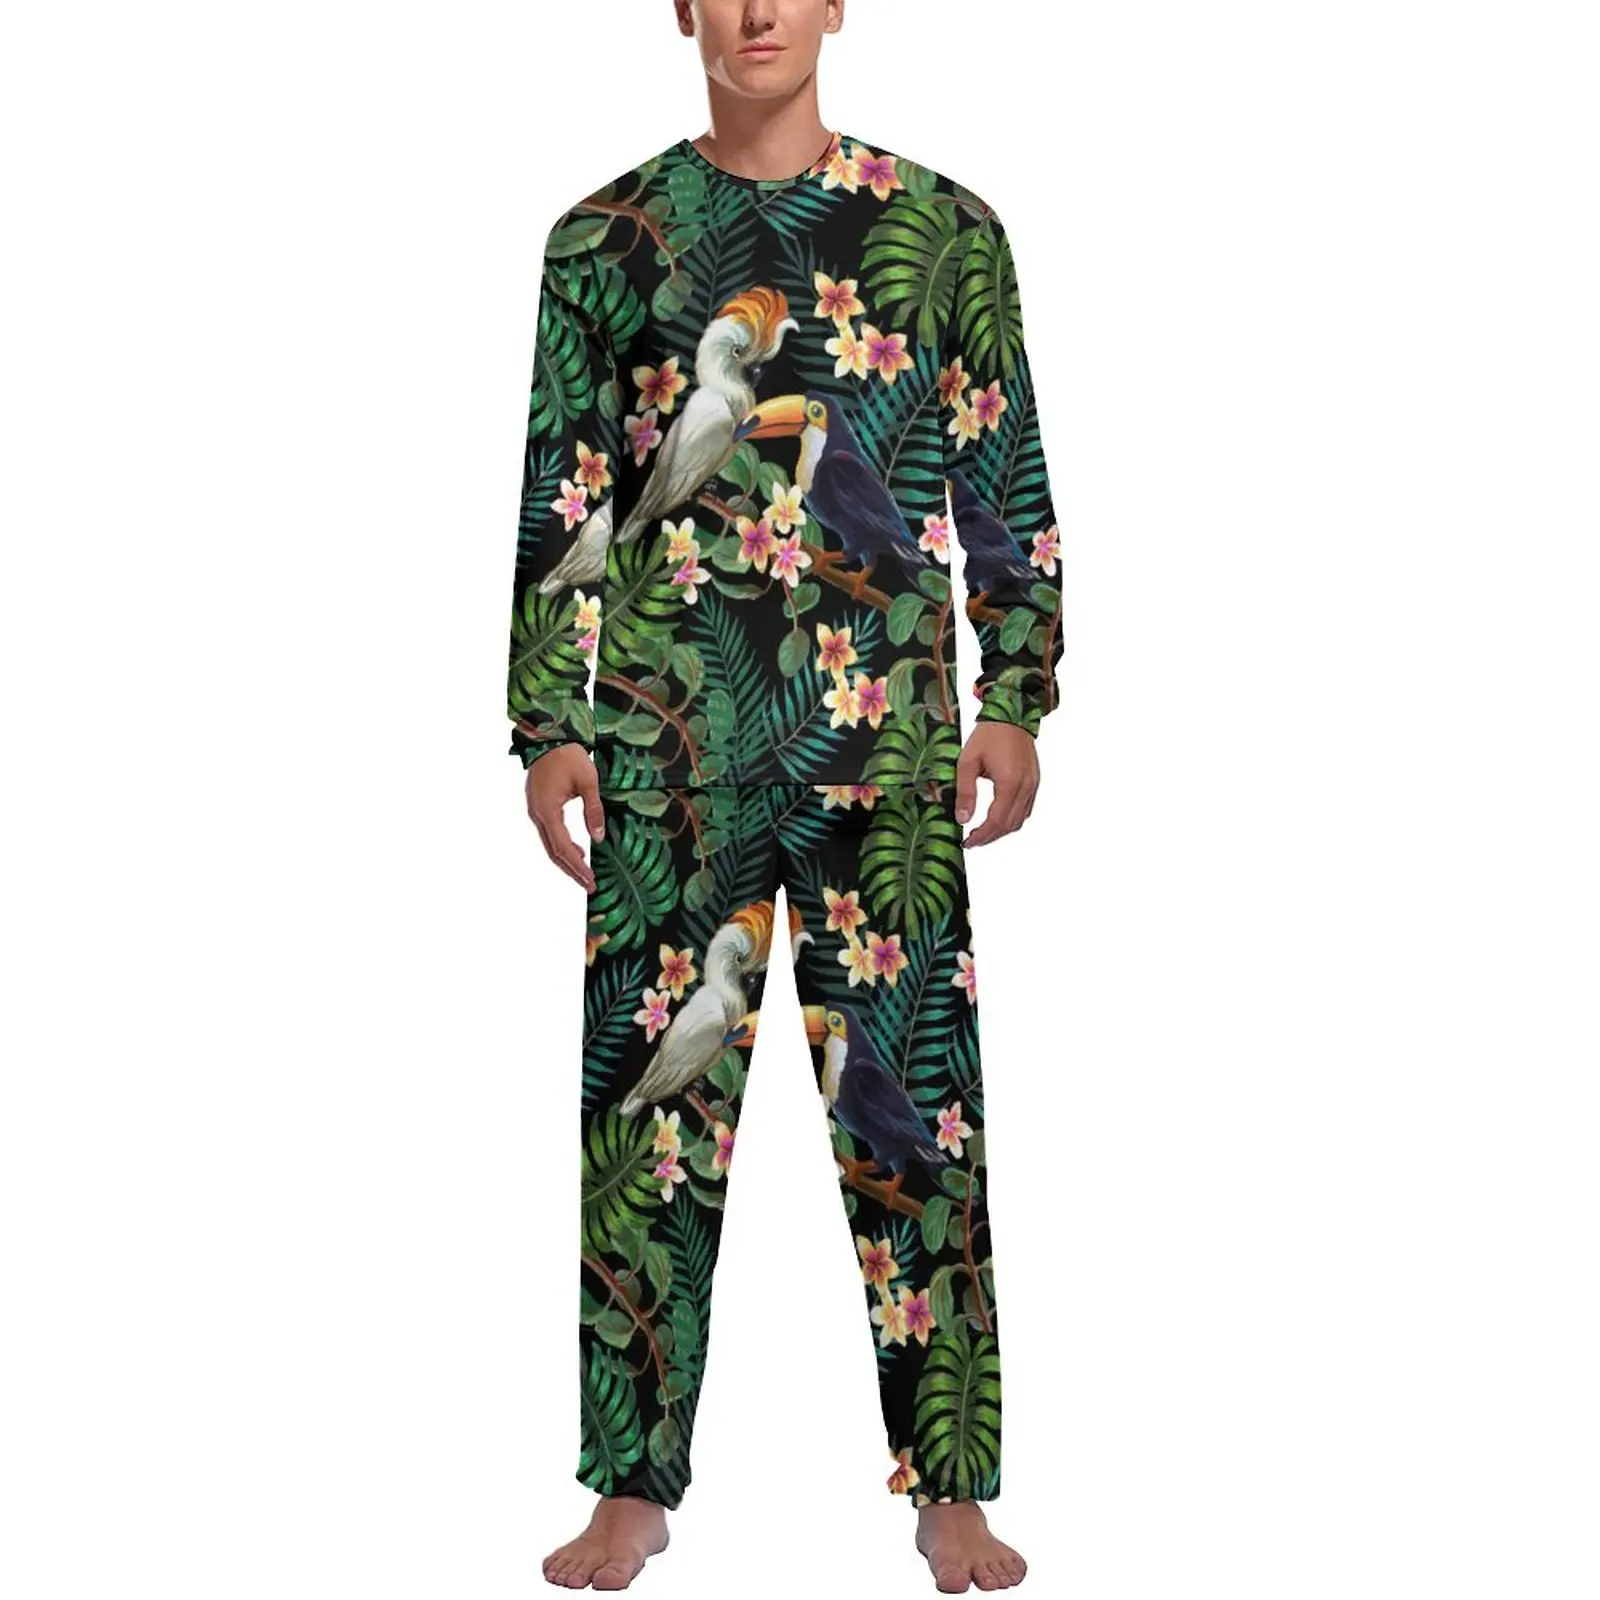 

Palm Leaves Forest Pajamas Floral And Birds Print Long Sleeve Cute Pajama Sets Two Piece Sleep Autumn Sleepwear Birthday Gift